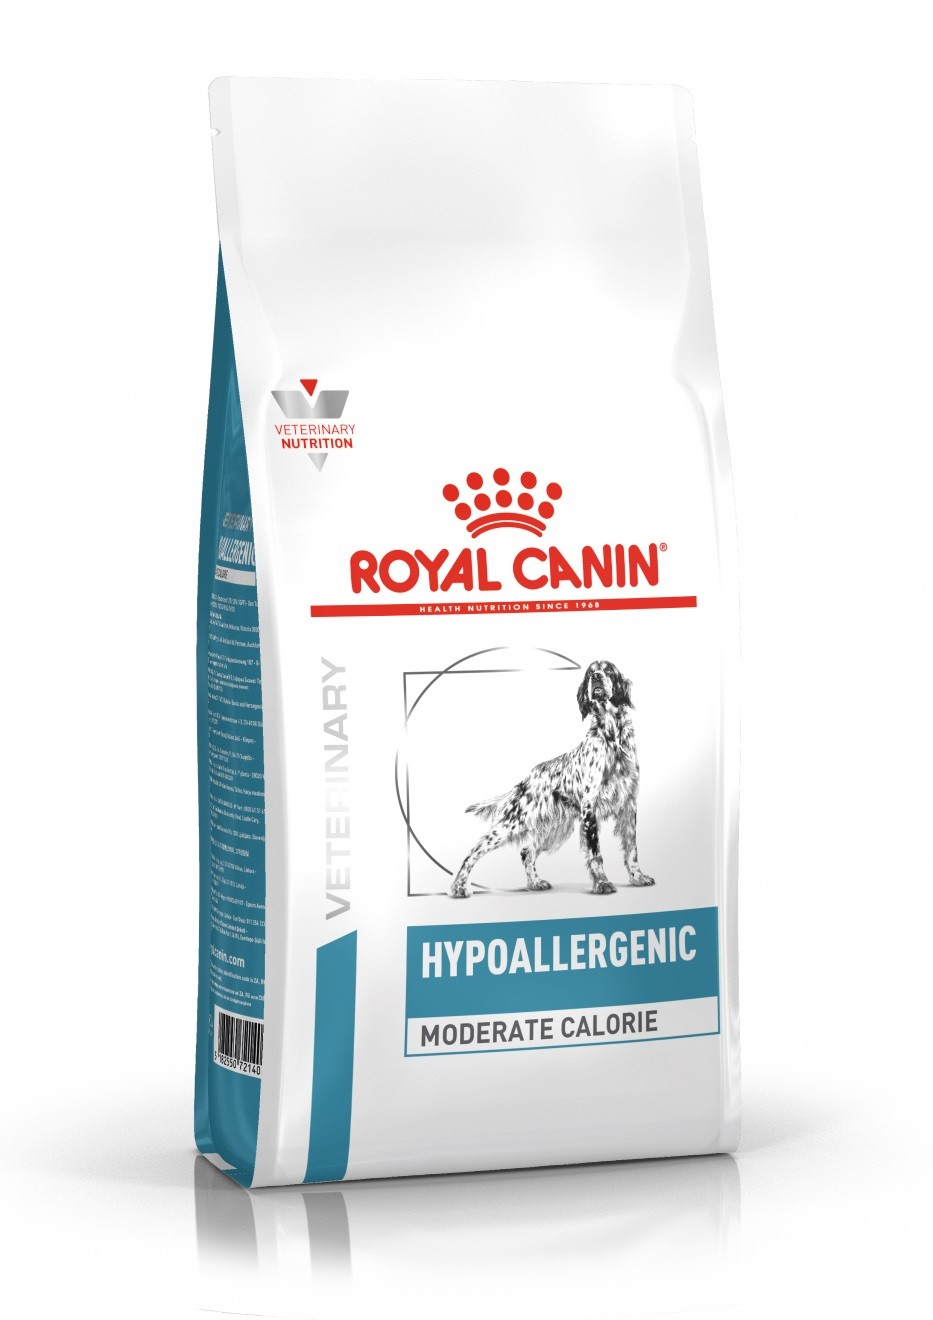 Royal Canin Veterinary Diet Hypoallergenic Moderate Calorie HME23 für Hunde